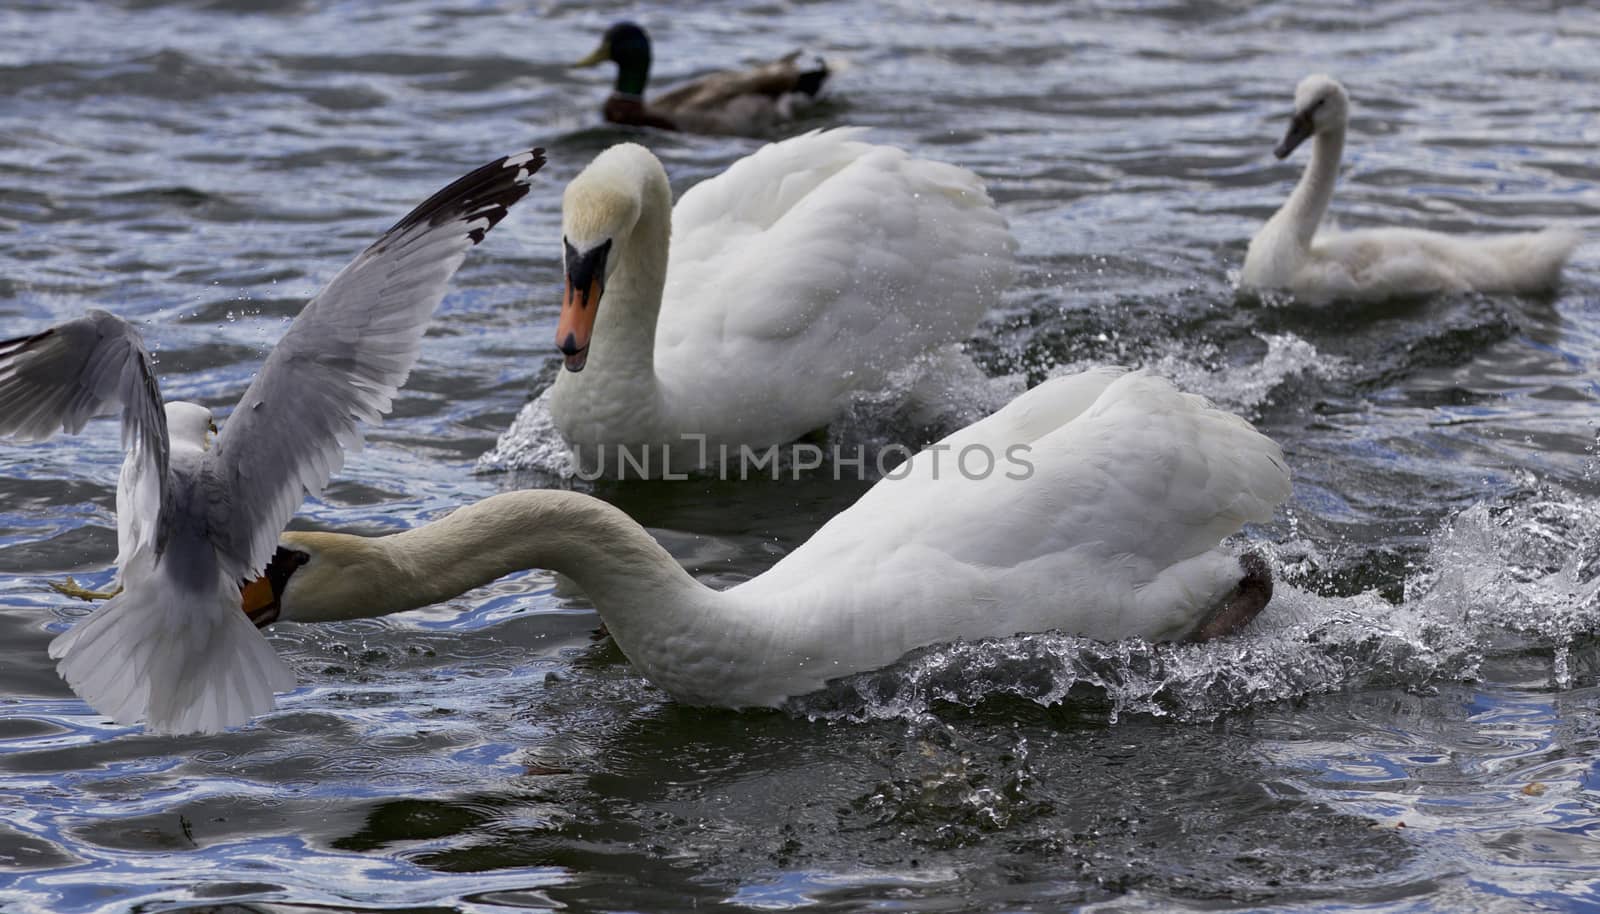 Amazing moment with a swan caught a gull by teo